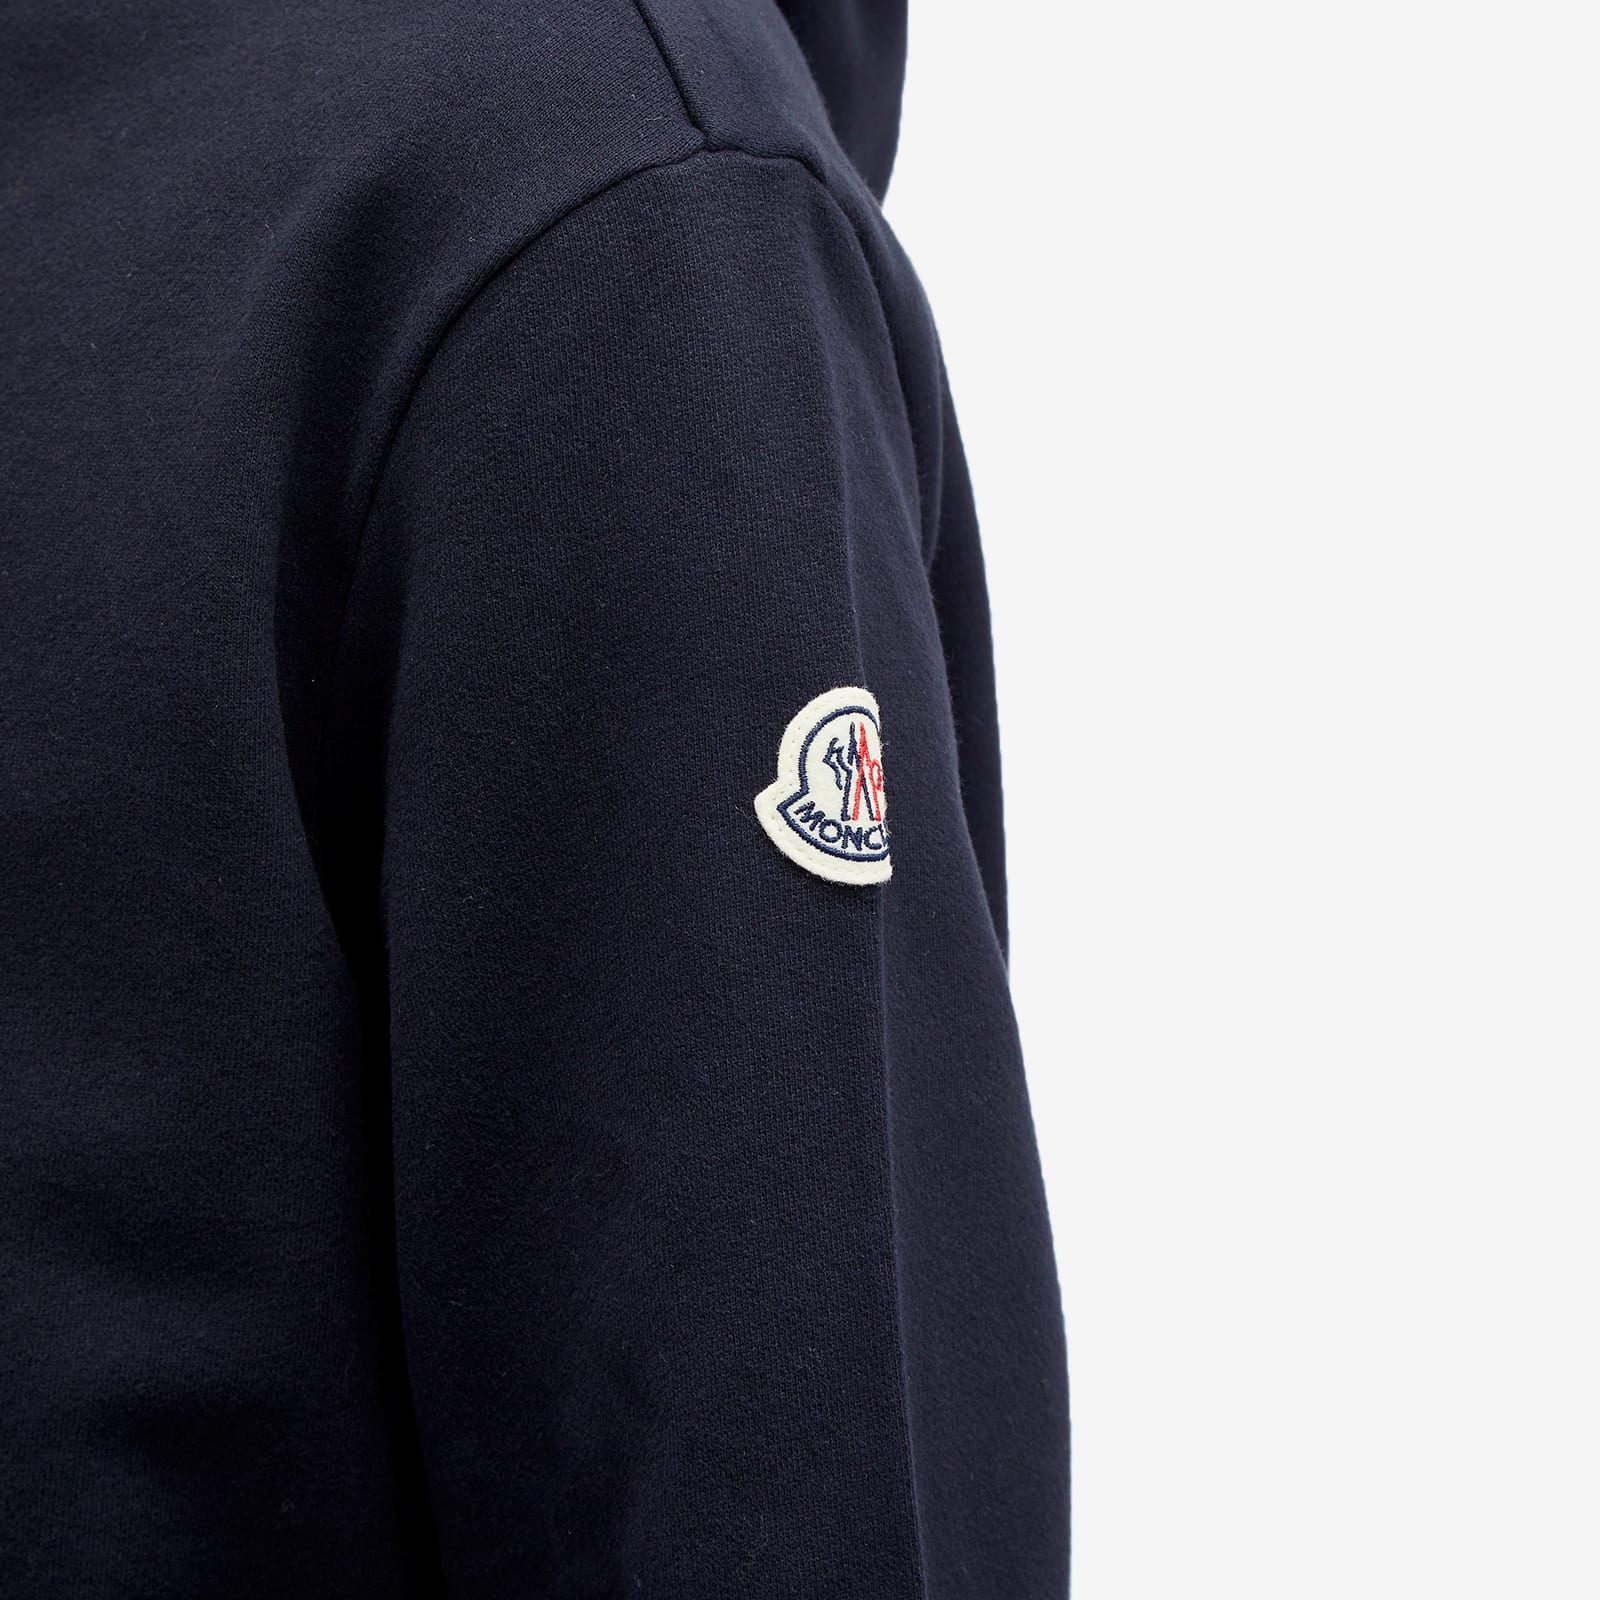 Moncler Large M Popover Hoody - 5